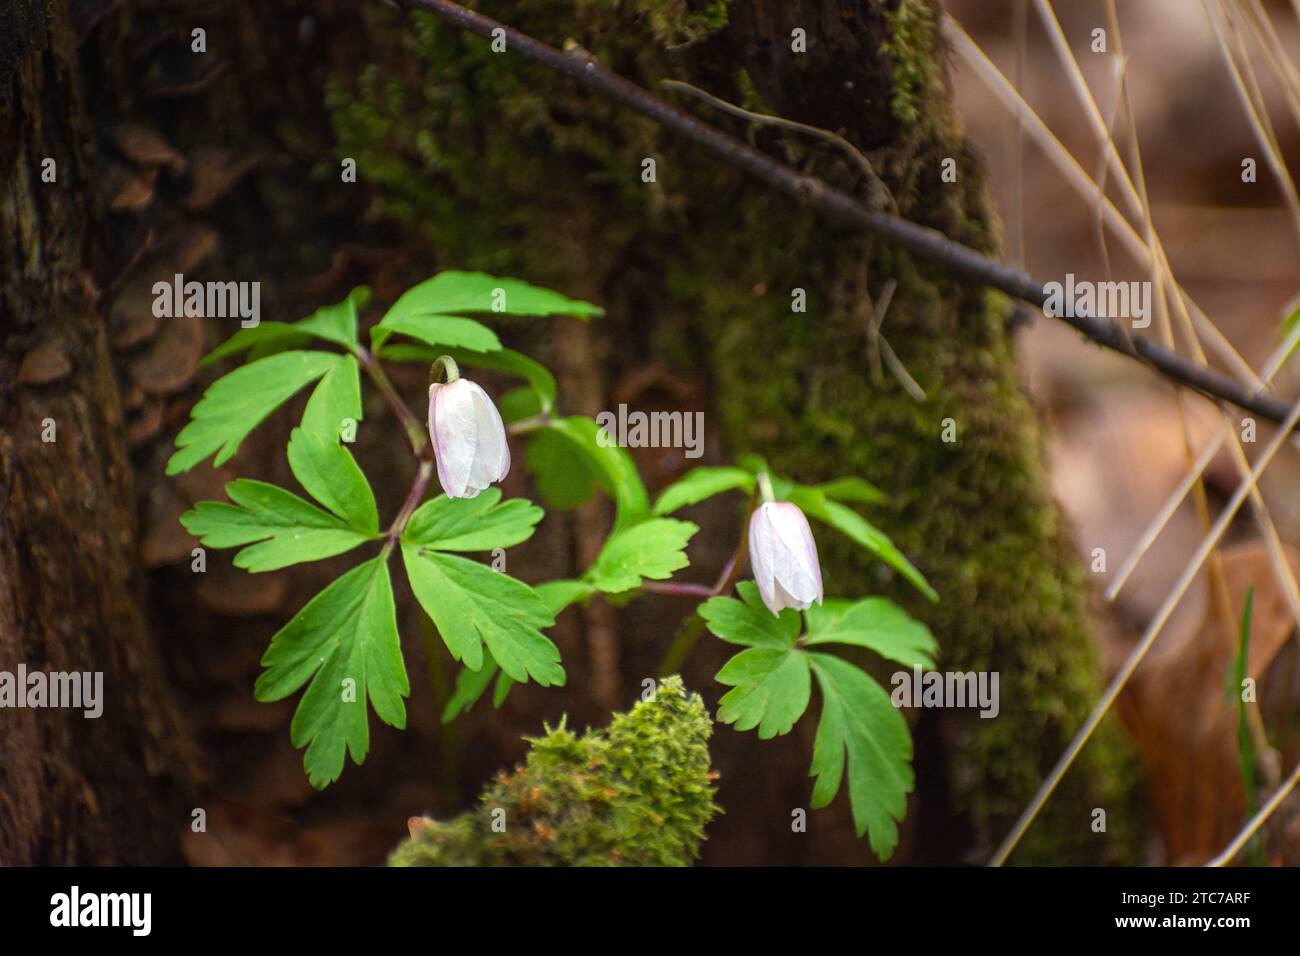 Flowers of a wood anemone growing near a tree, April day Stock Photo